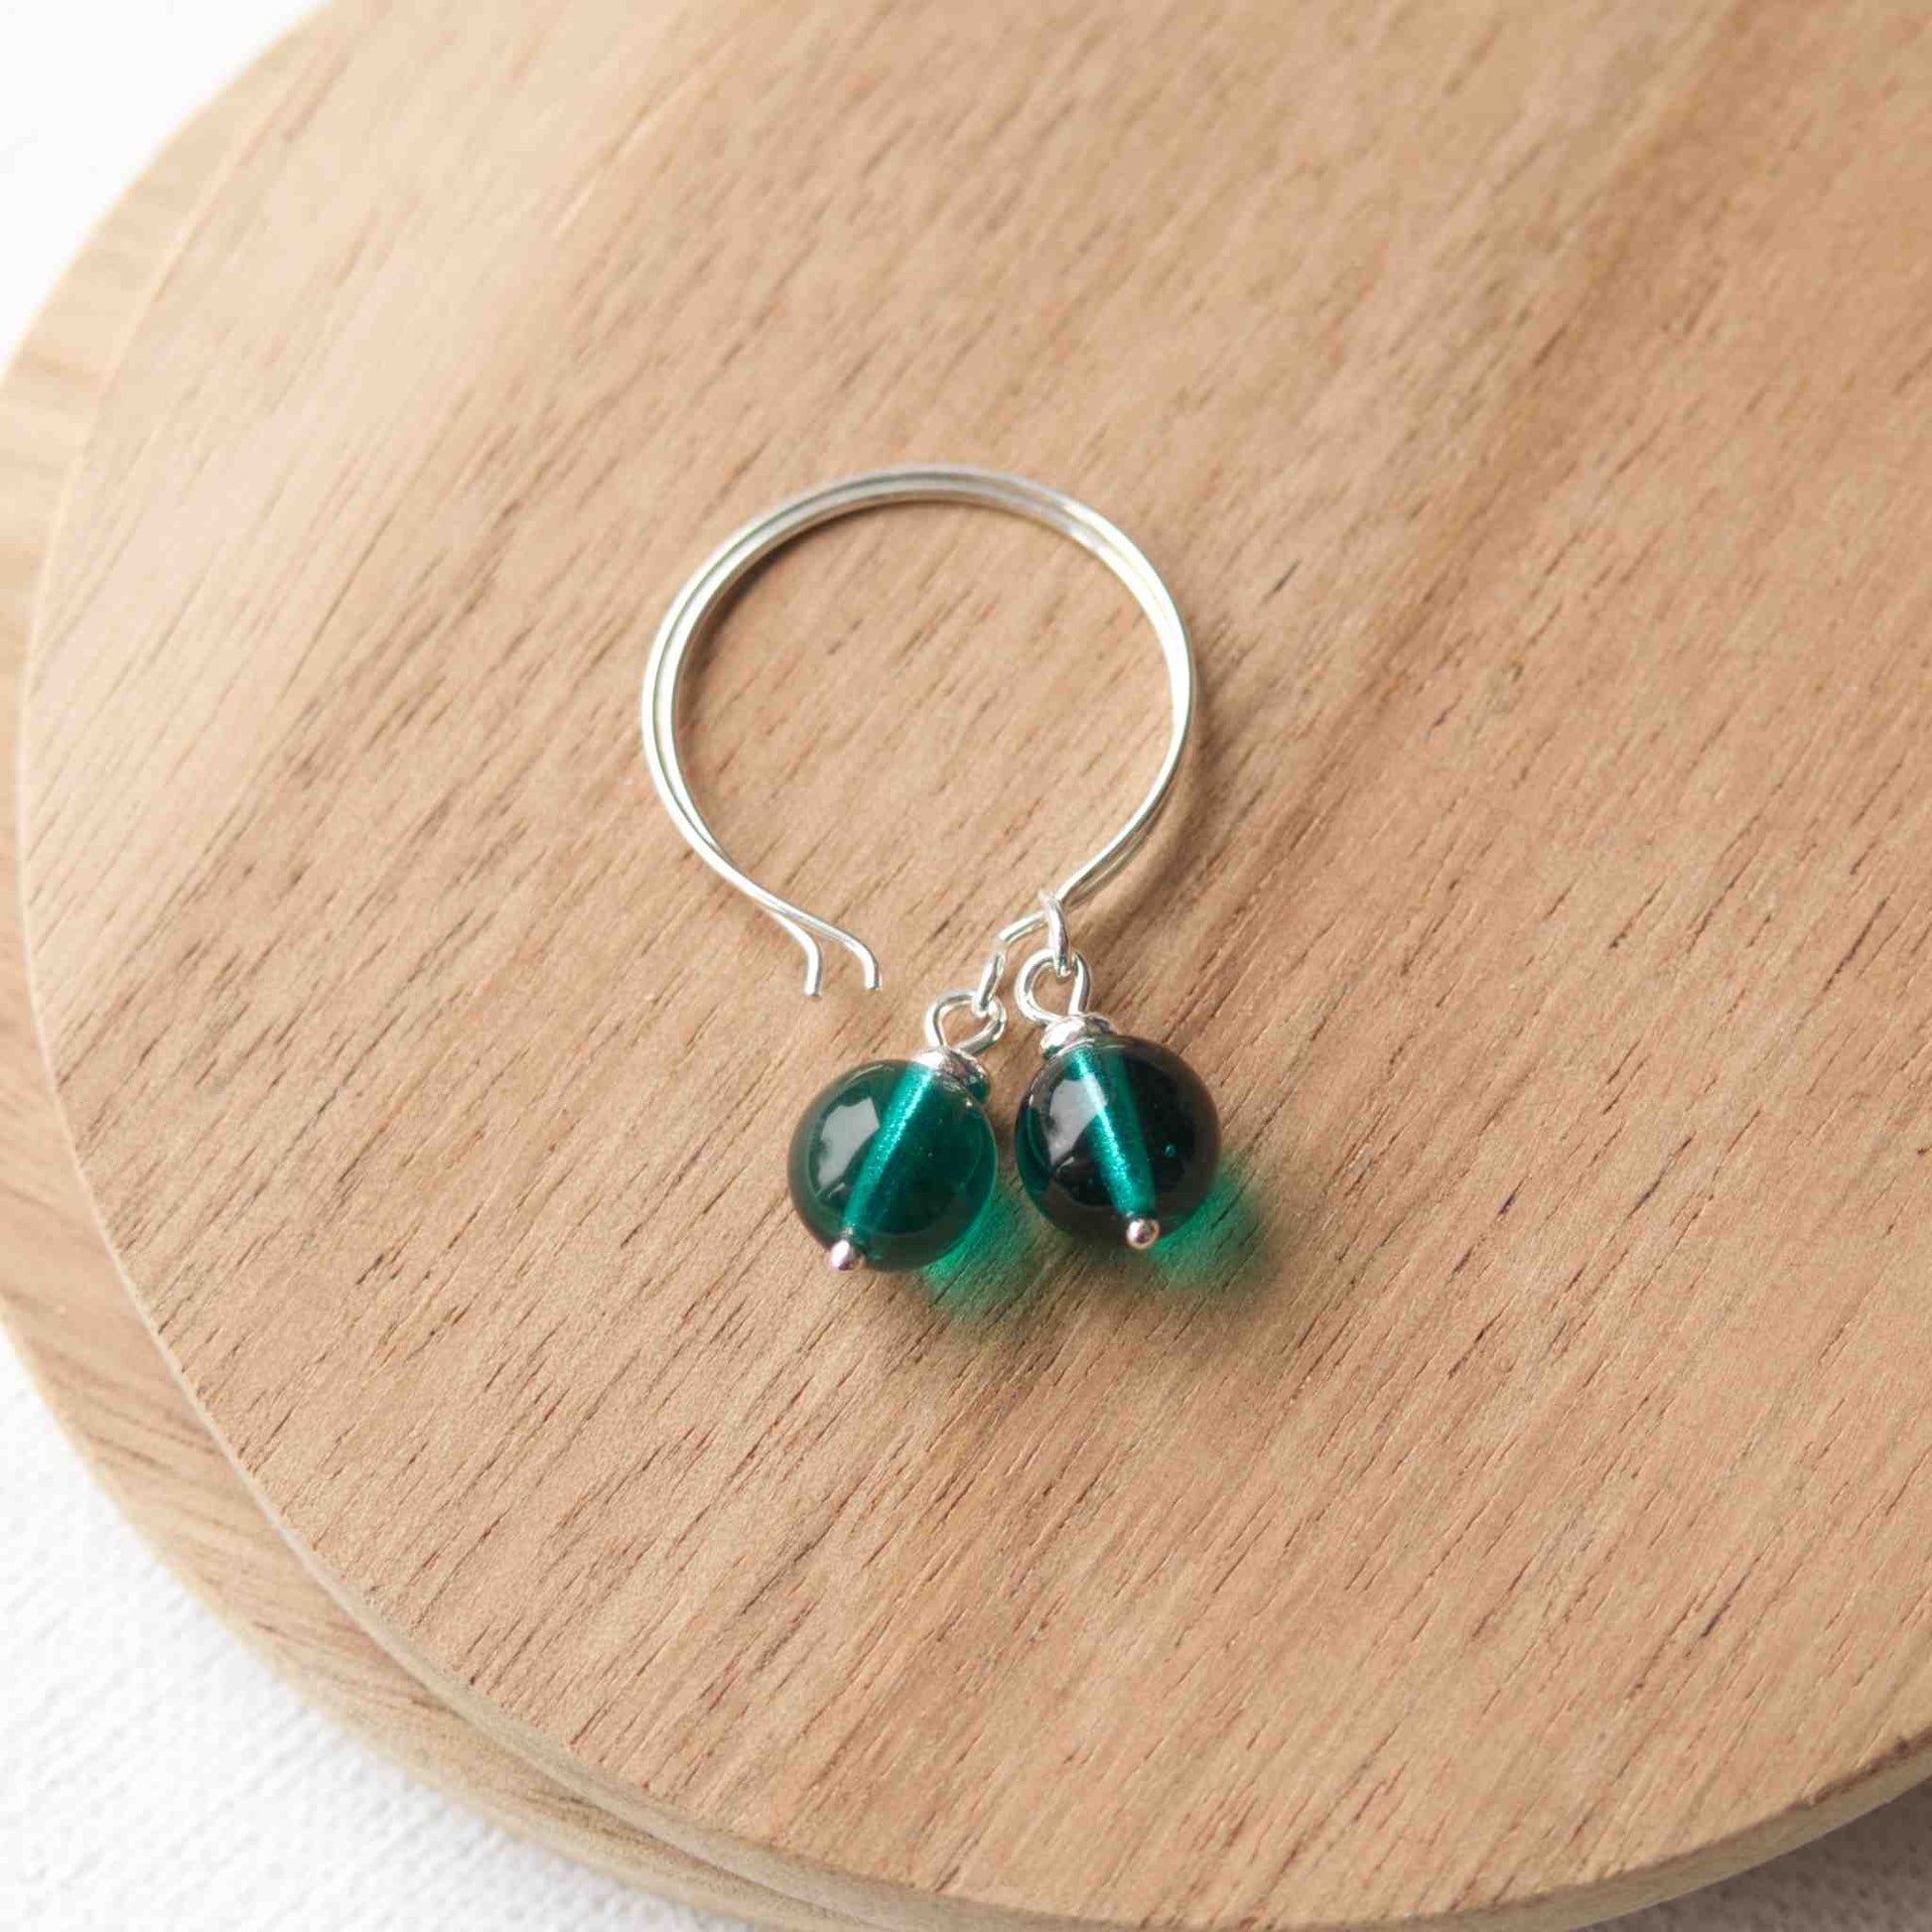 Green Silver minimalist handmade silver hoops. Handcrafted ear wires with a round glass bead dropper. Made in Scotland by maram jewellery